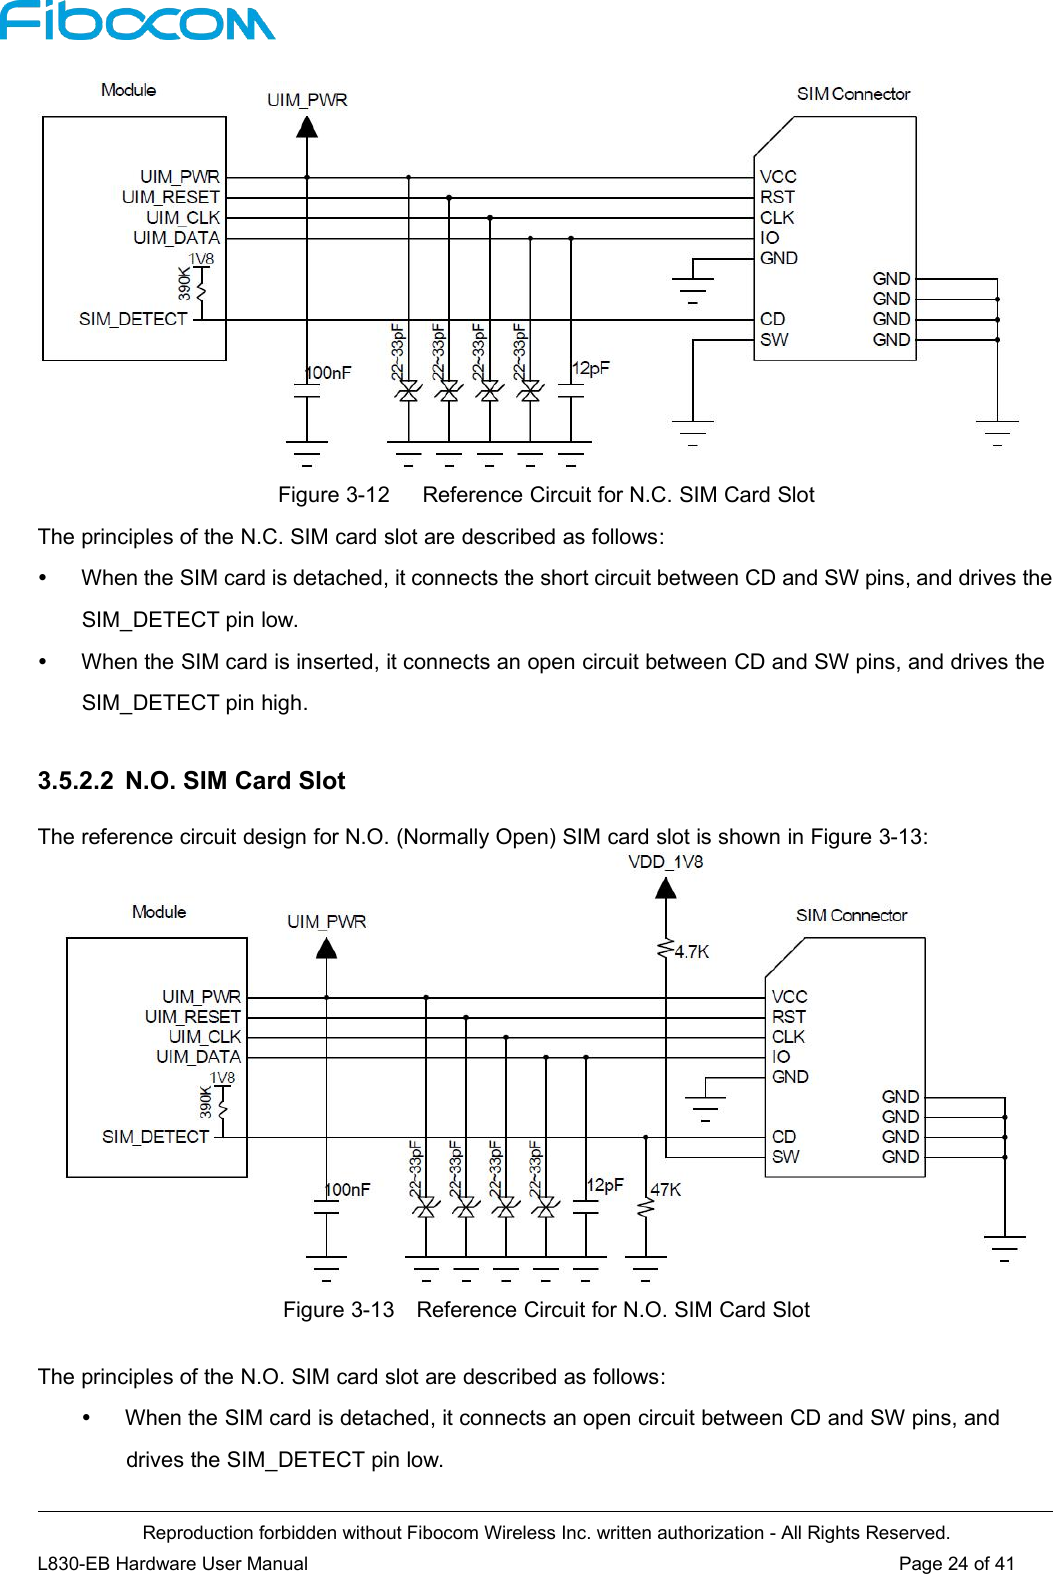 Reproduction forbidden without Fibocom Wireless Inc. written authorization - All Rights Reserved.L830-EB Hardware User Manual Page 24 of 41Figure 3-12 Reference Circuit for N.C. SIM Card SlotThe principles of the N.C. SIM card slot are described as follows:When the SIM card is detached, it connects the short circuit between CD and SW pins, and drives theSIM_DETECT pin low.When the SIM card is inserted, it connects an open circuit between CD and SW pins, and drives theSIM_DETECT pin high.3.5.2.2 N.O. SIM Card SlotThe reference circuit design for N.O. (Normally Open) SIM card slot is shown in Figure 3-13:Figure 3-13 Reference Circuit for N.O. SIM Card SlotThe principles of the N.O. SIM card slot are described as follows:When the SIM card is detached, it connects an open circuit between CD and SW pins, anddrives the SIM_DETECT pin low.